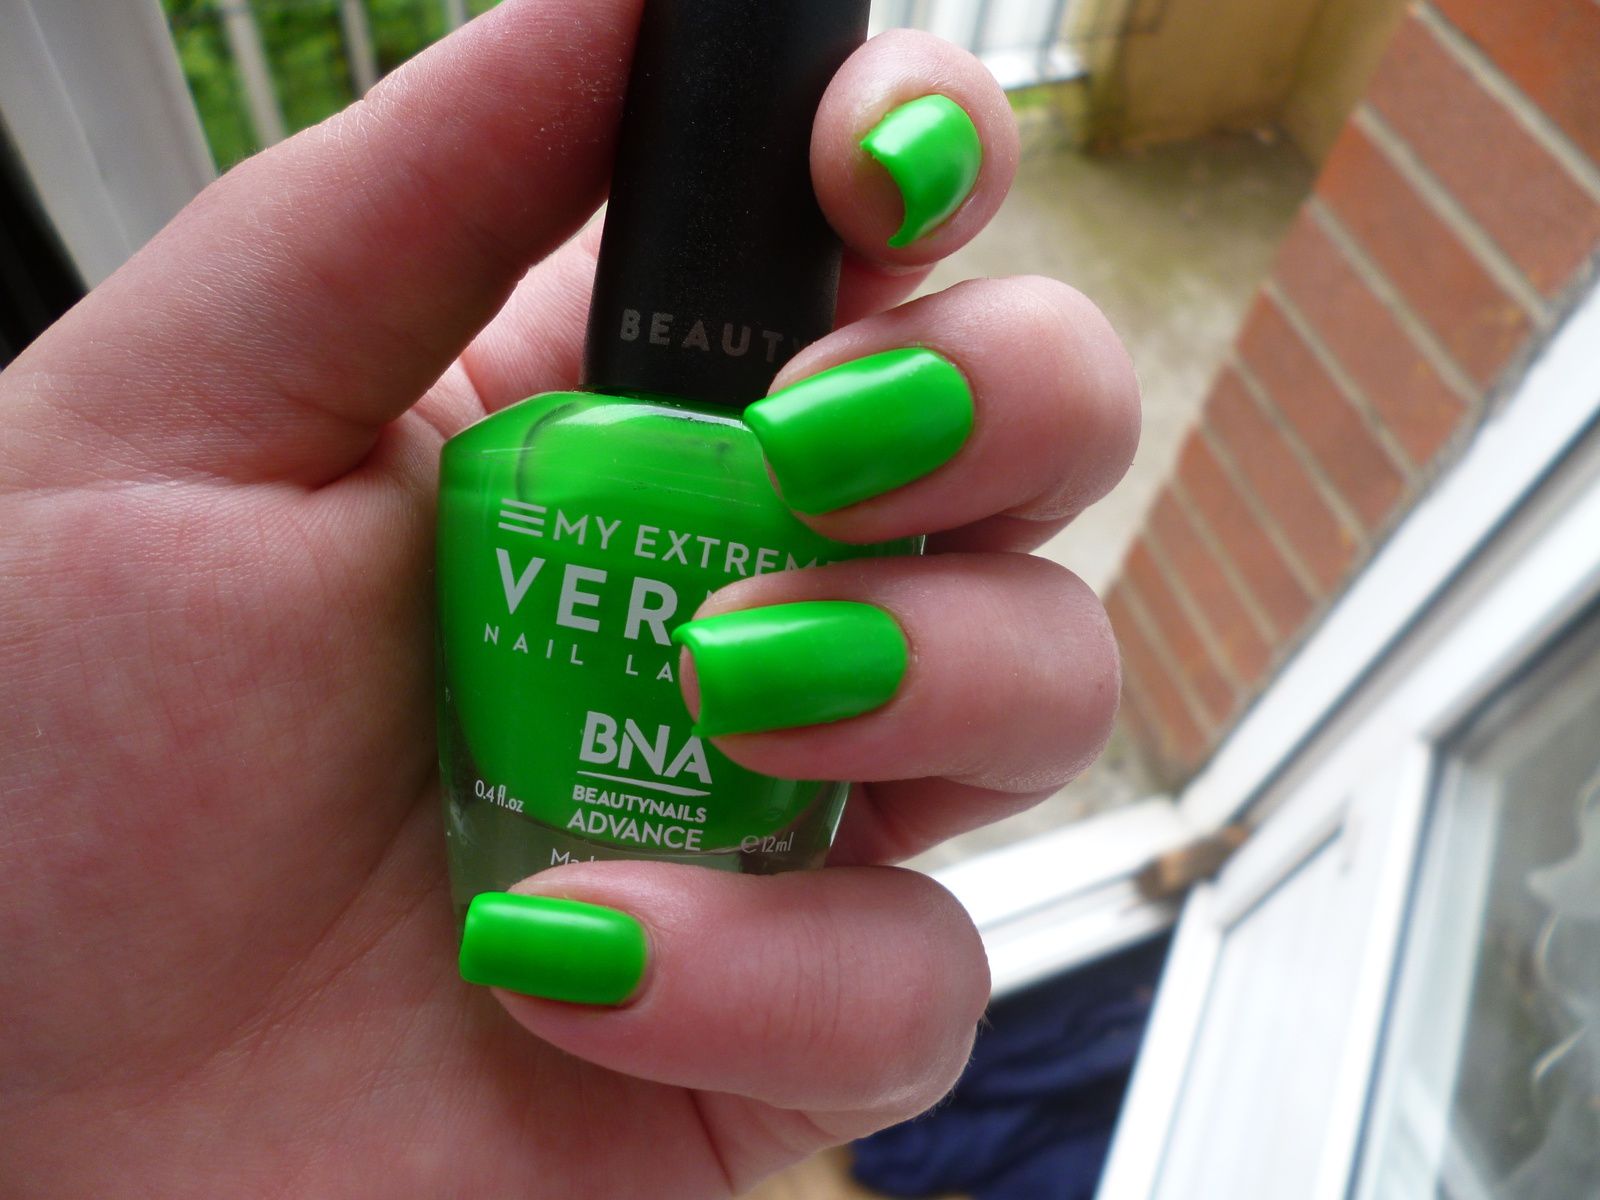 MY EXTREM VERNIS GREEN FLUO - Beautynails 